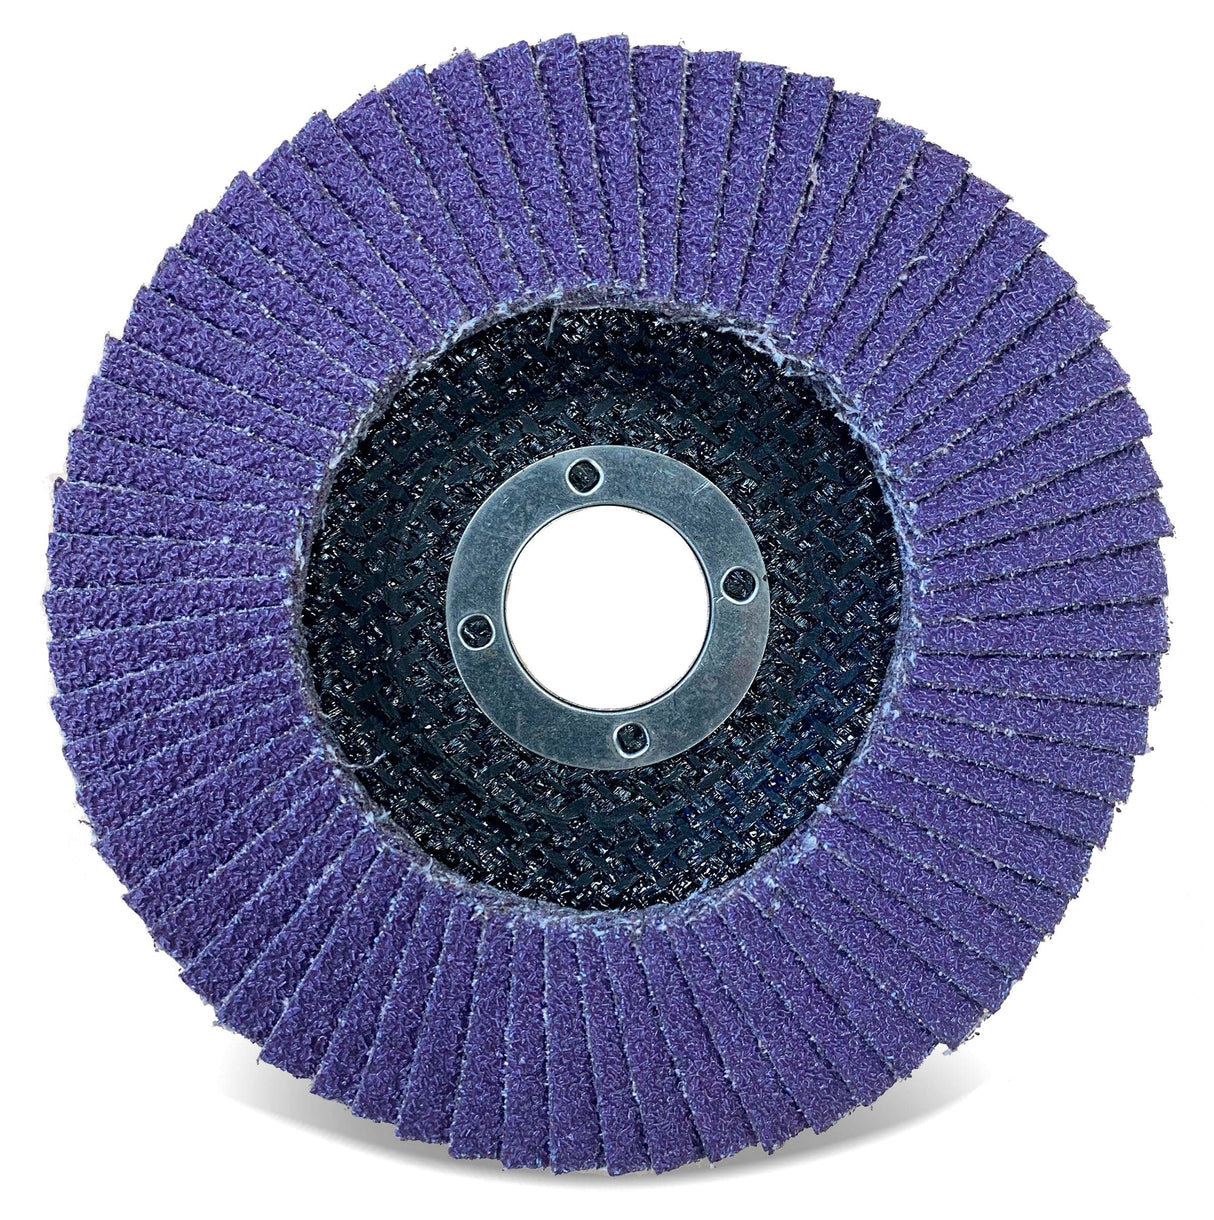 CGW Consumables CGW 4-1/2in. x 5/8 PSG Flap Disc 36 Grit Type 27-XL (43860)